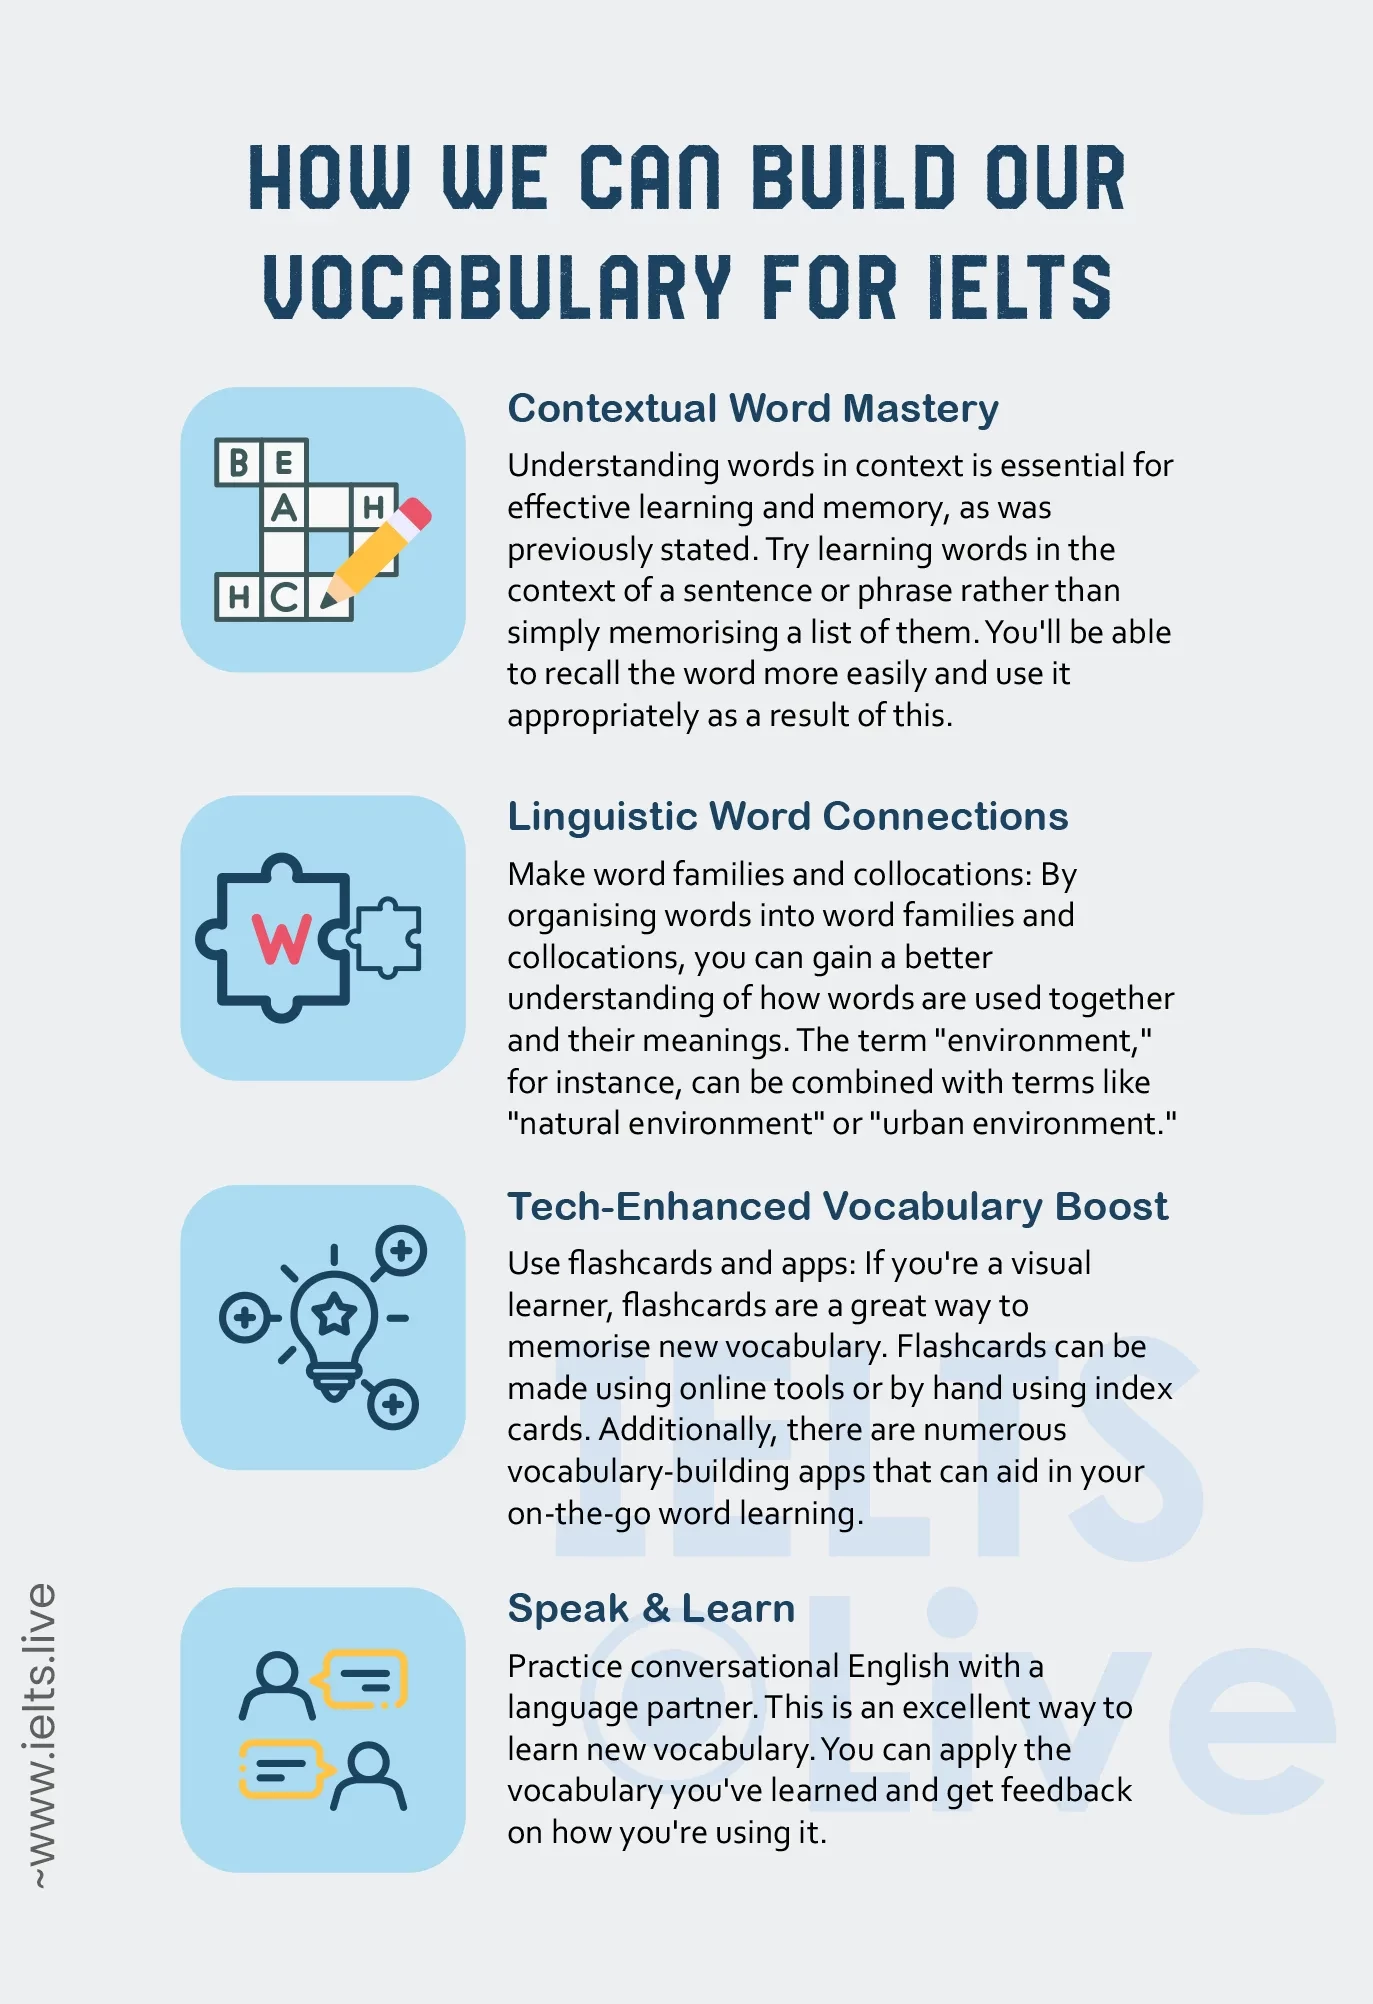 How we can build our vocabulary for IELTS